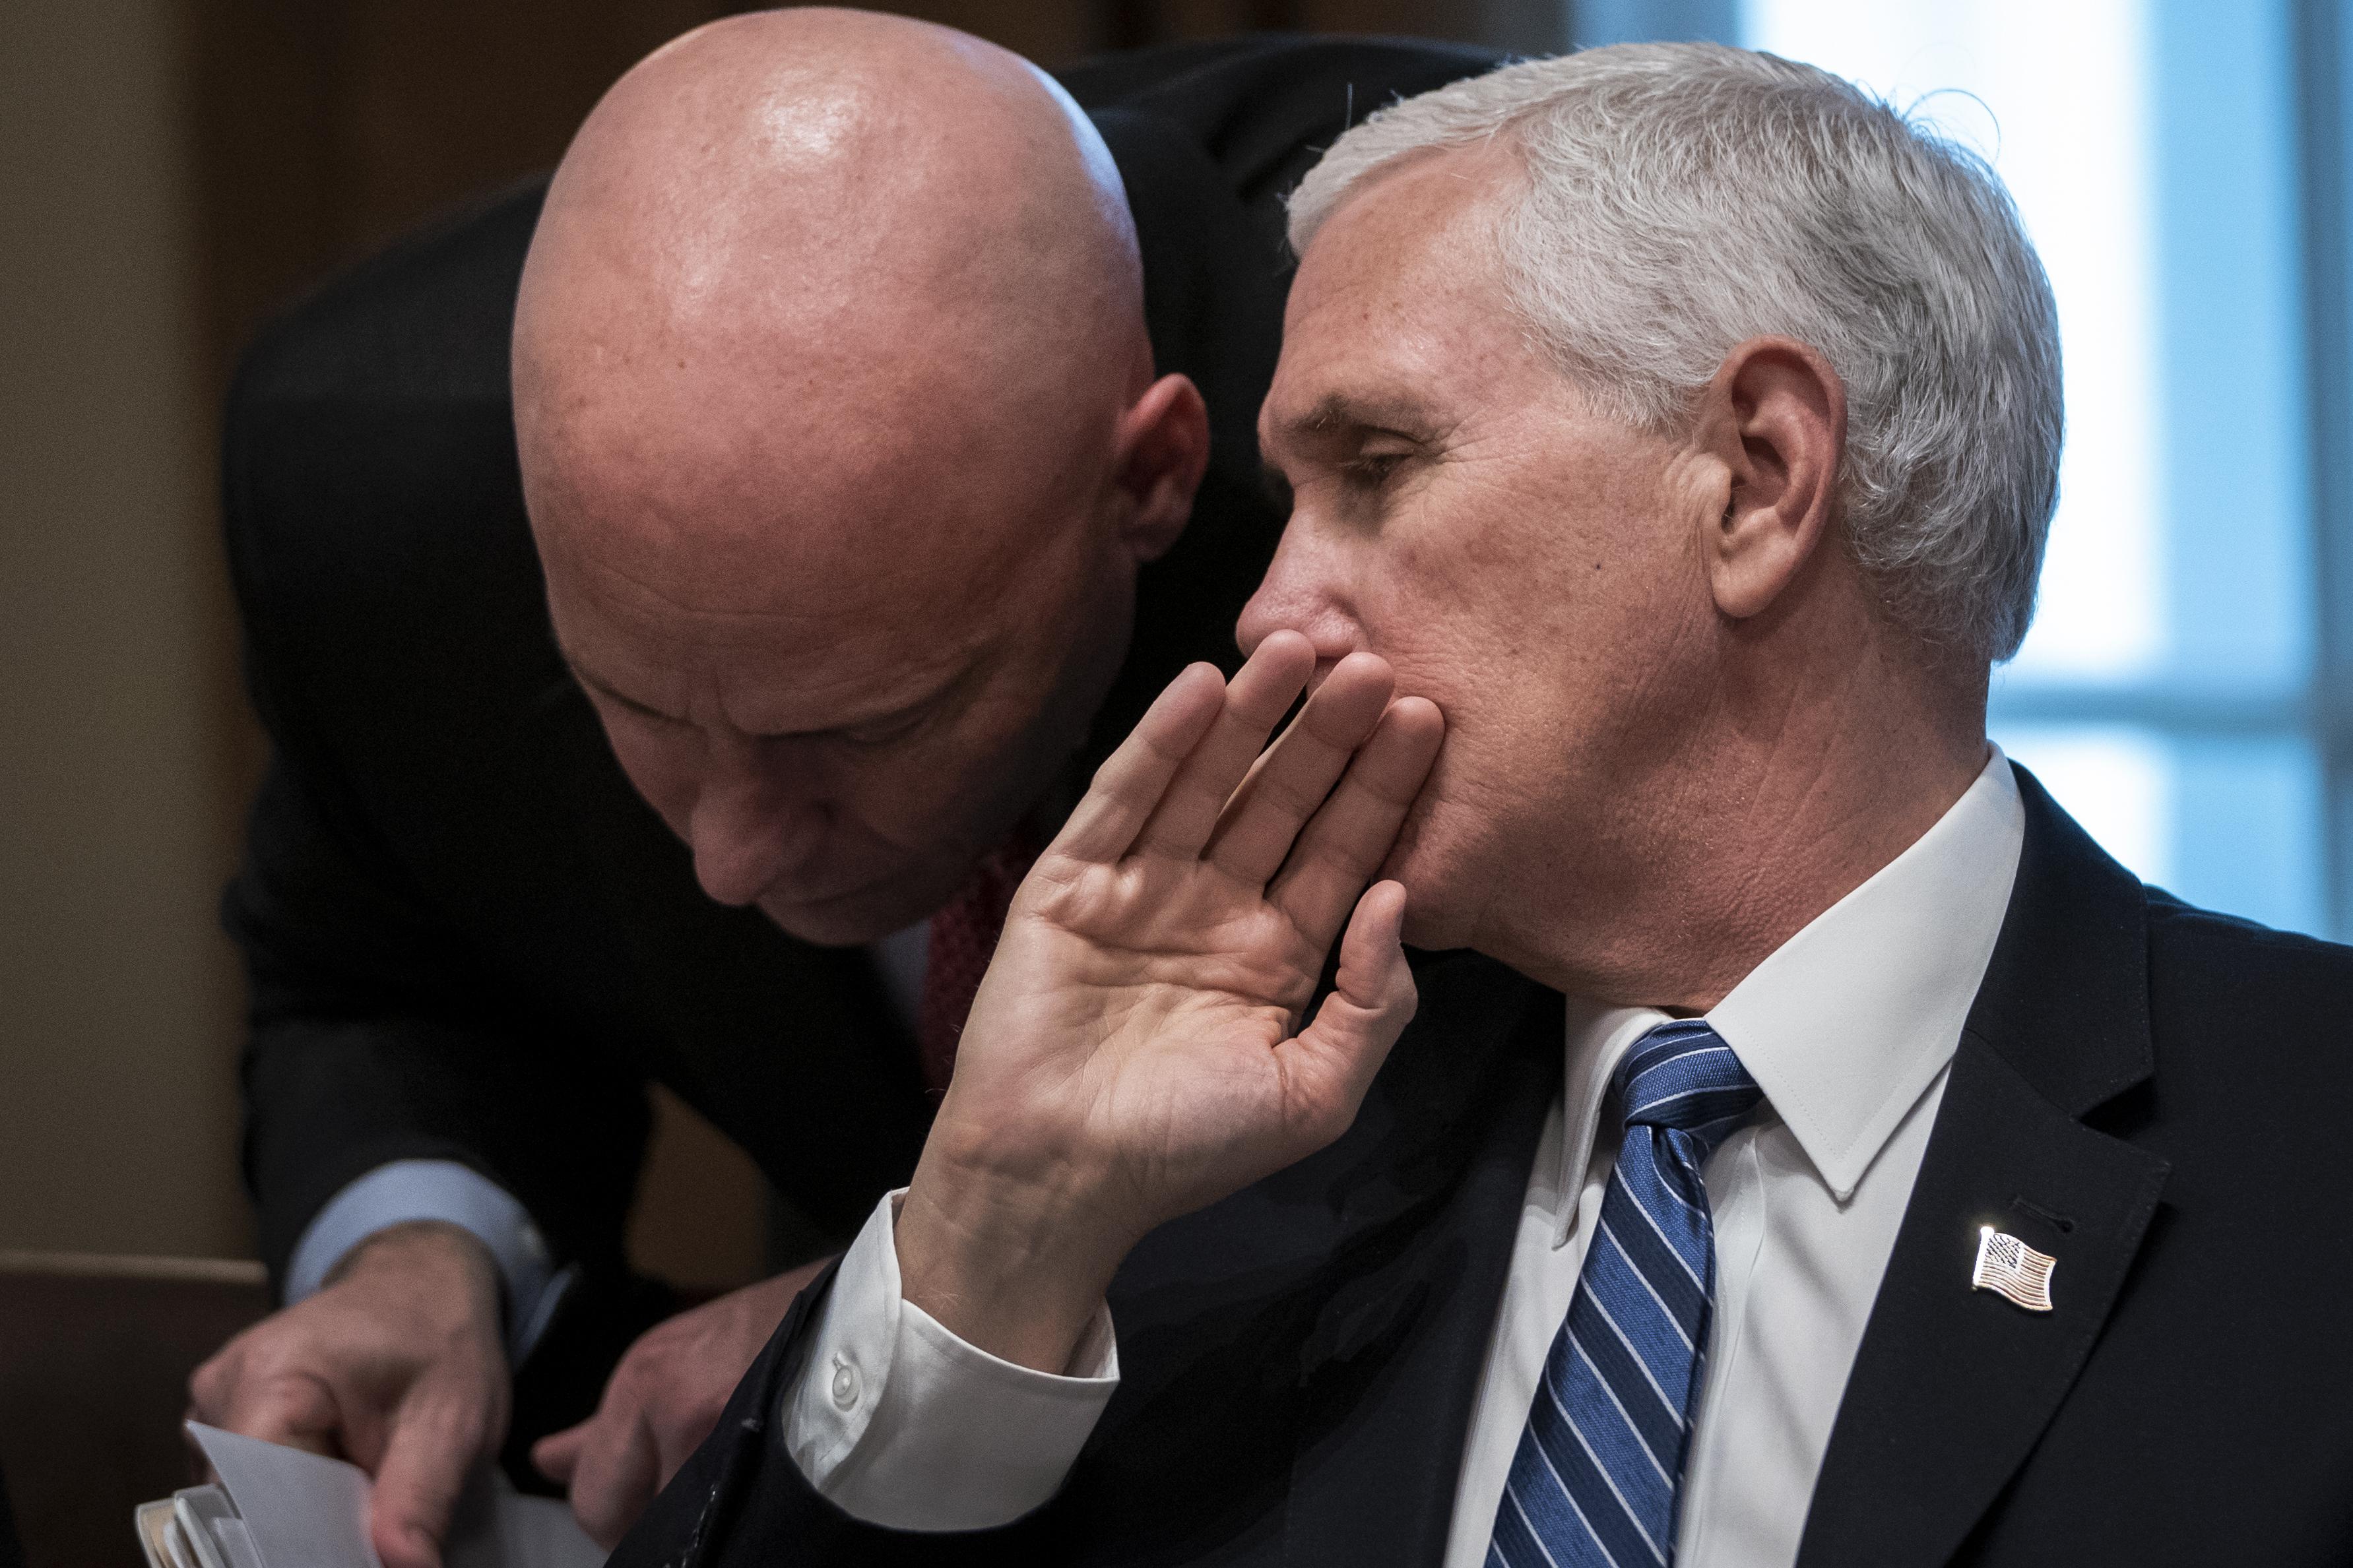 Then-Vice President Mike Pence and his chief of staff Marc Short confer during a meeting at the White House on March 2, 2020 in Washington, D.C.